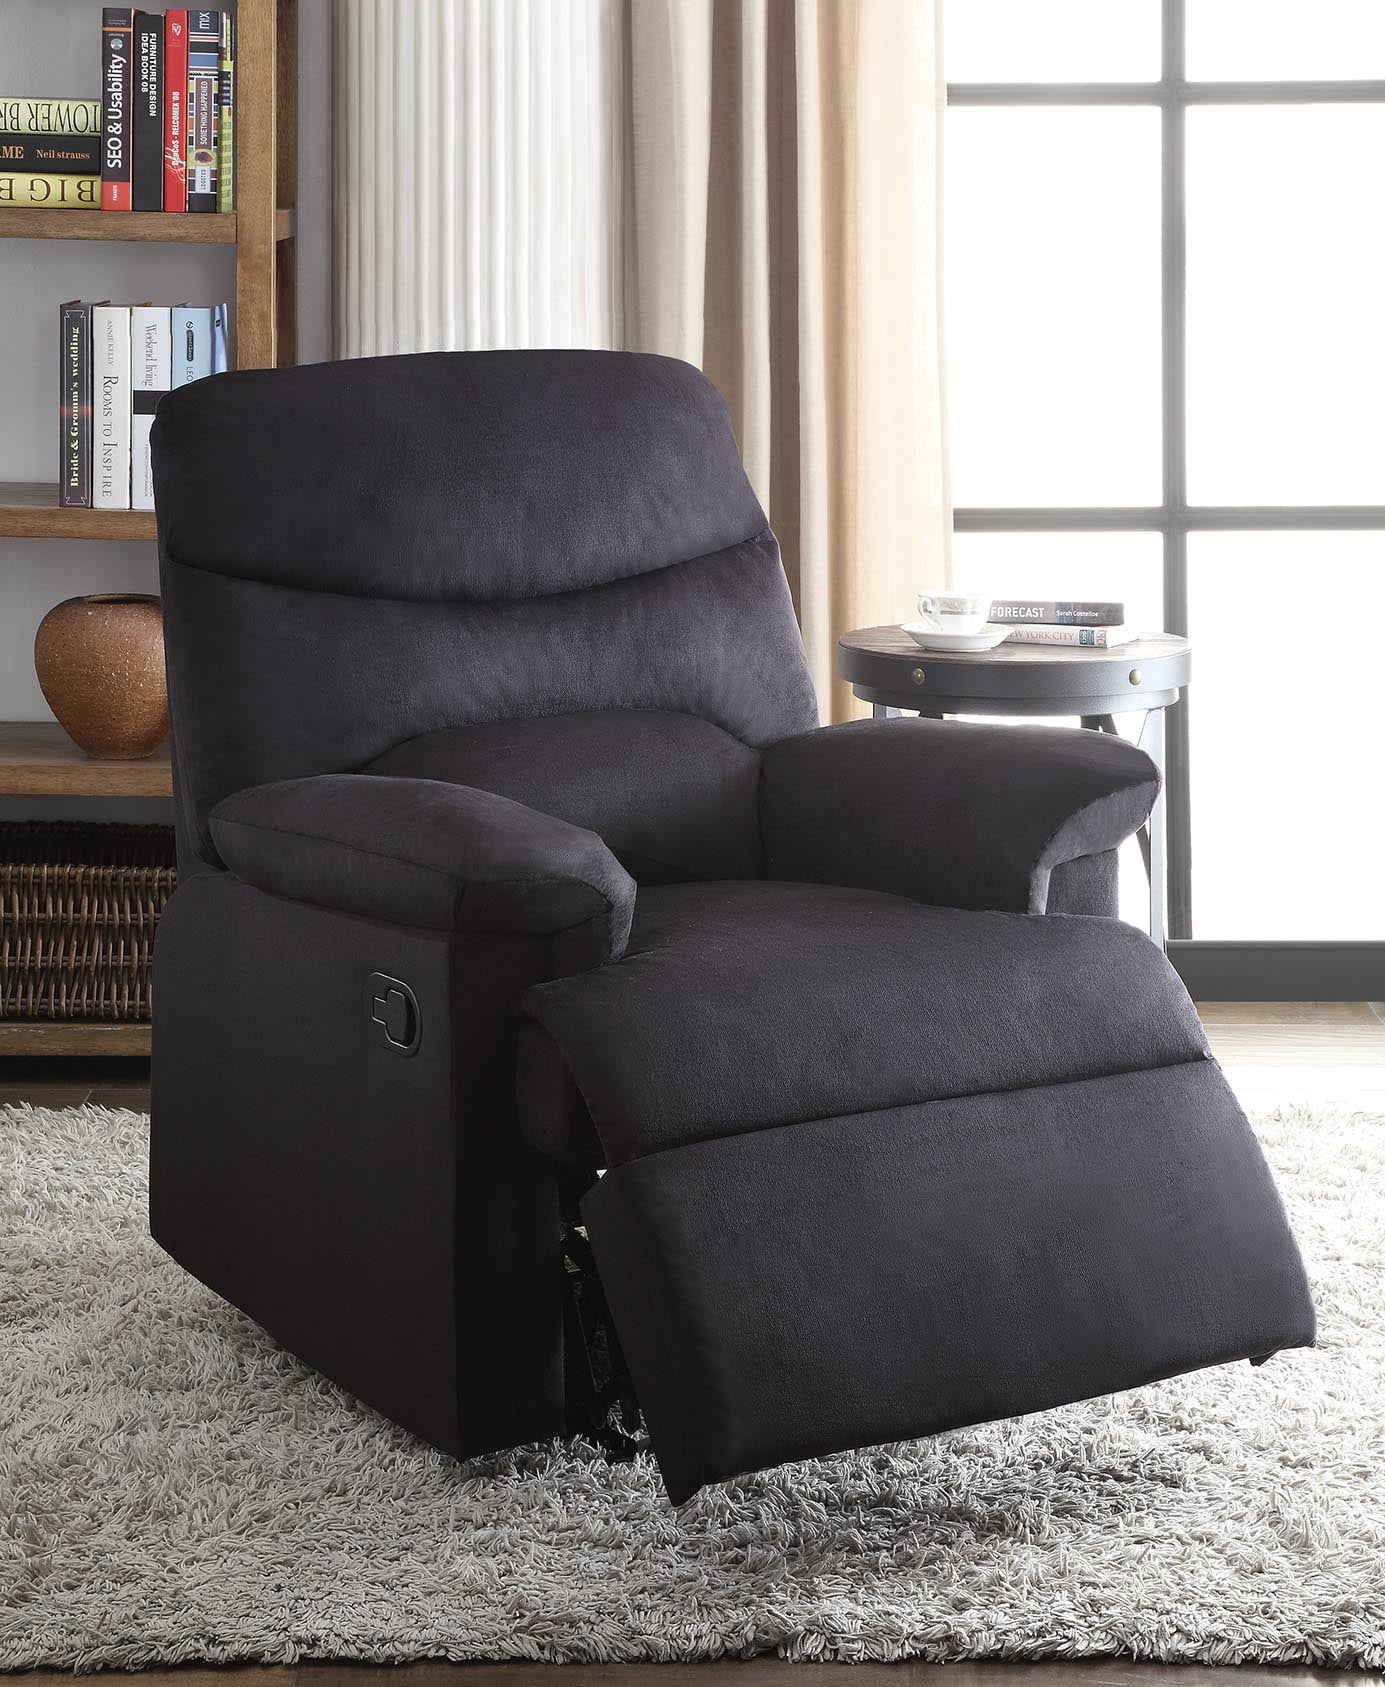 Picture of ACME 00701 Arcadia Recliner - Black Woven Fabric